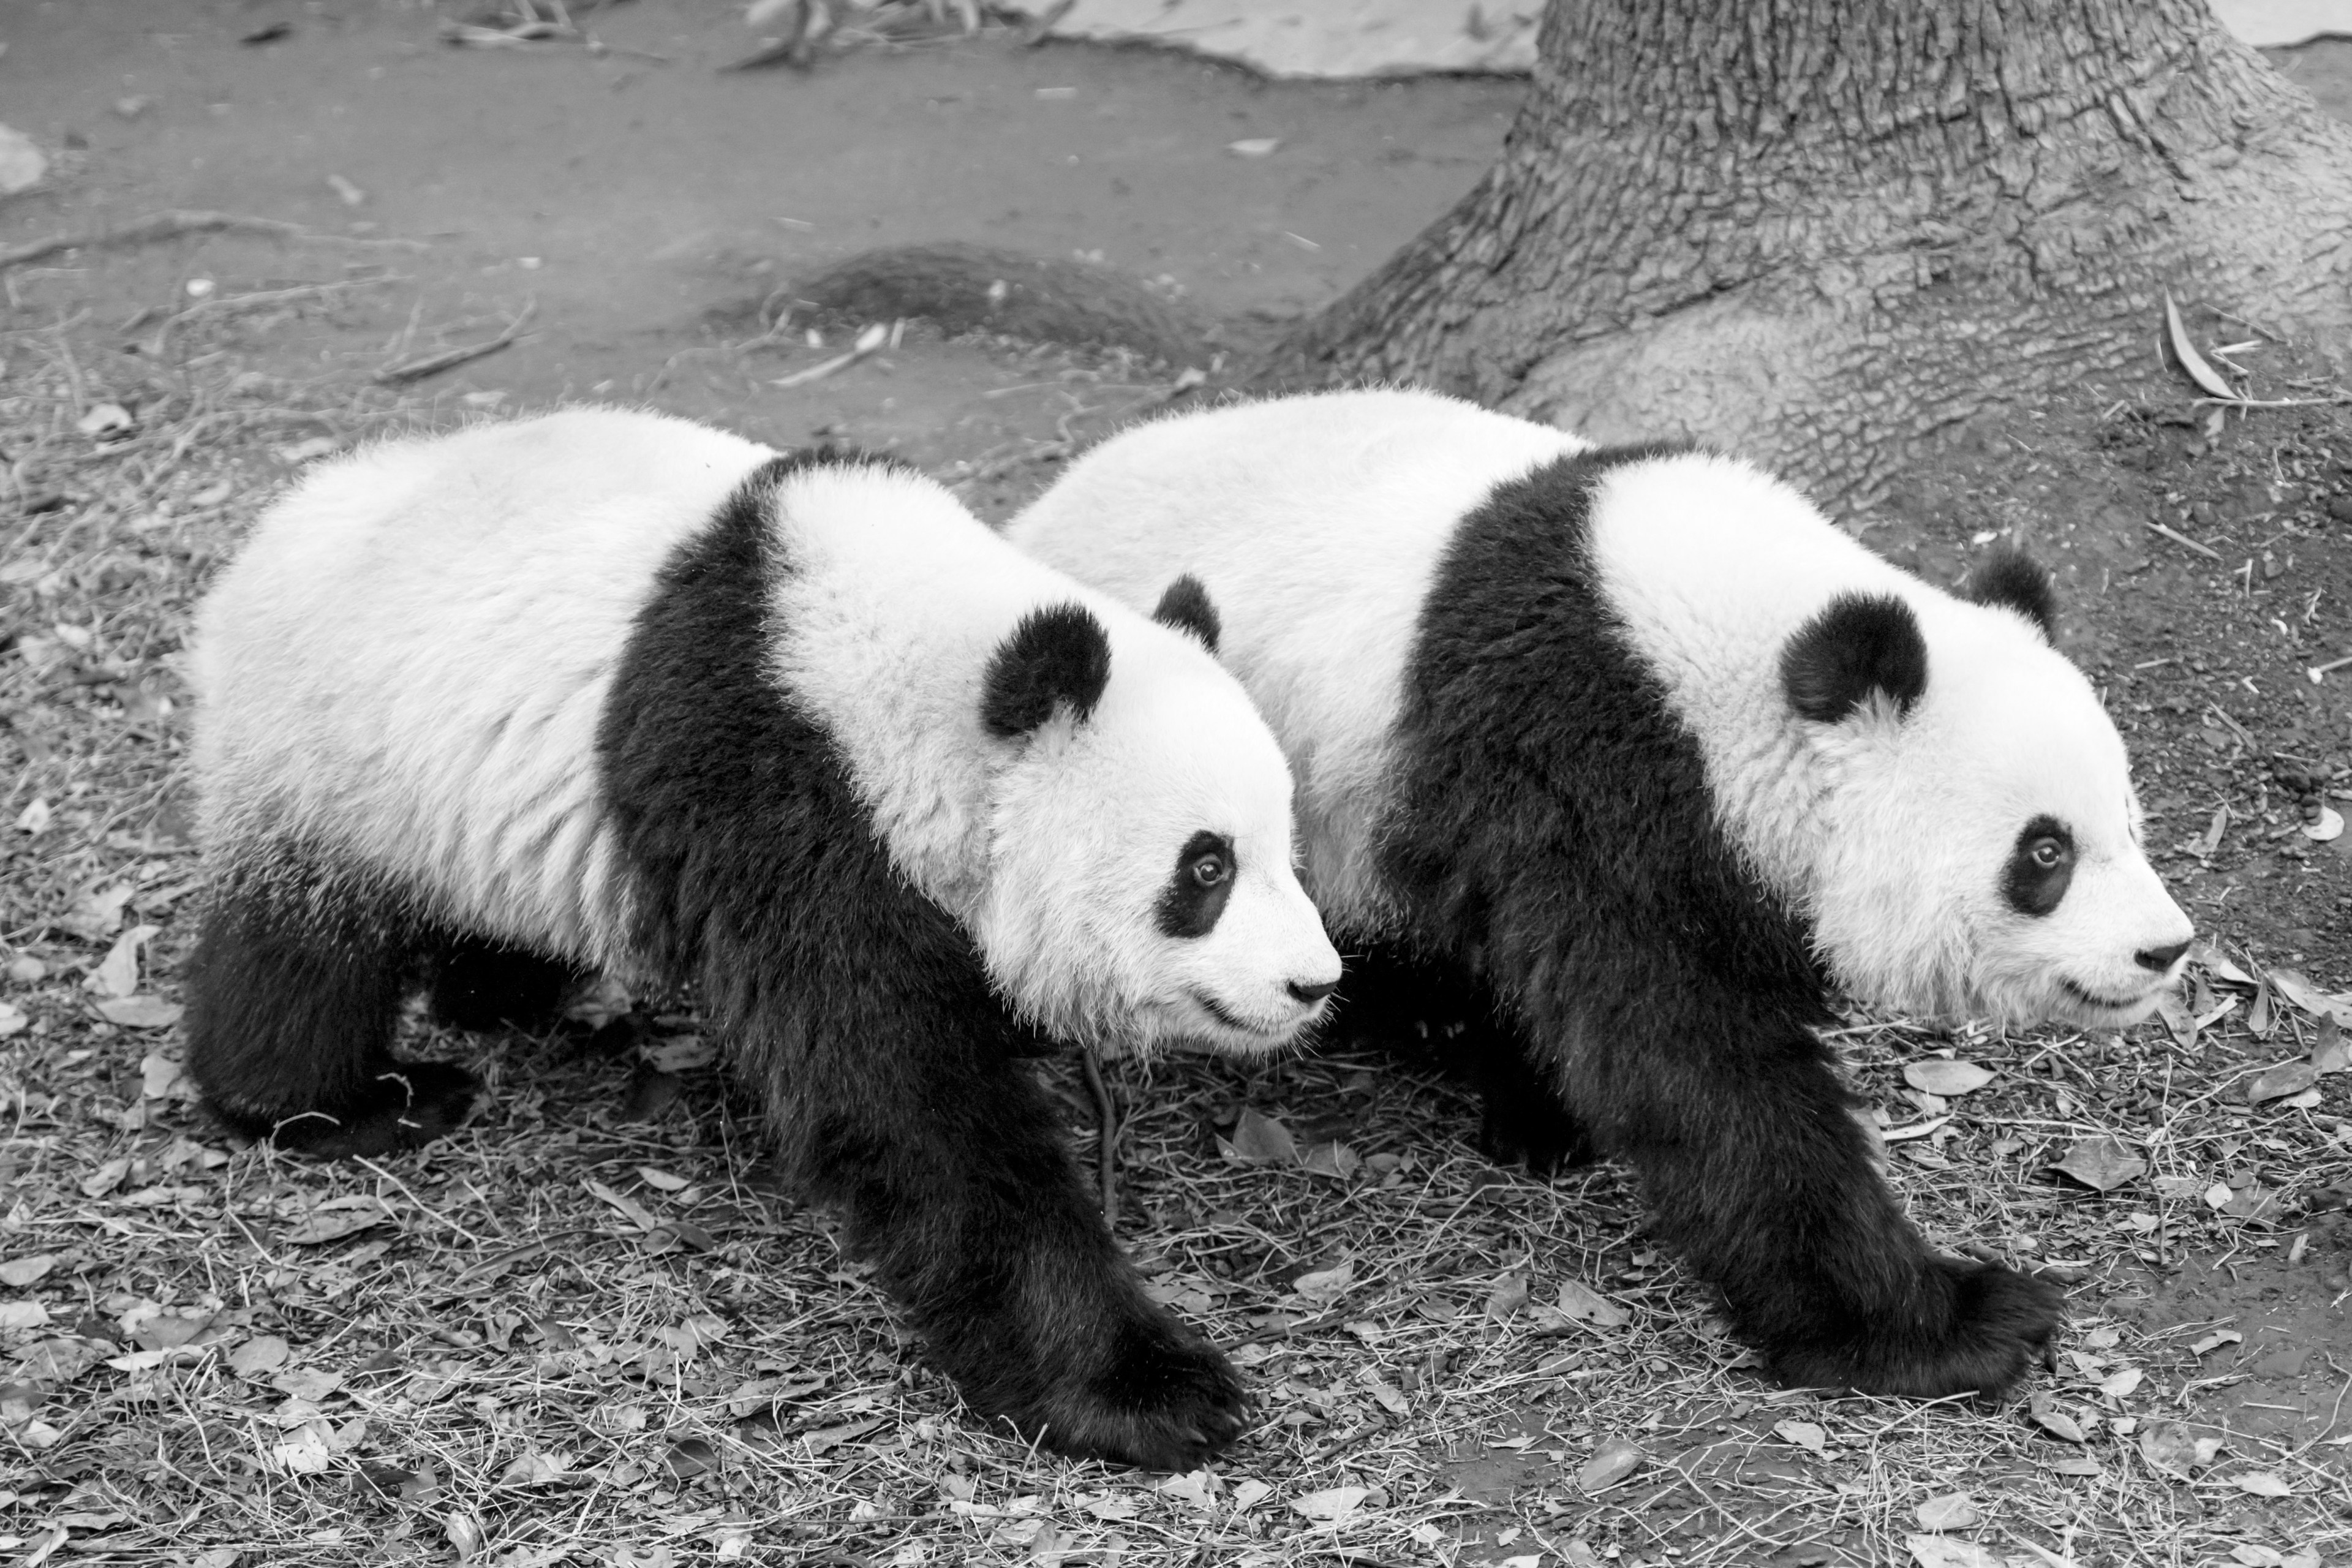 Two pandas walking side by side, monochrome image, with a tree trunk background.